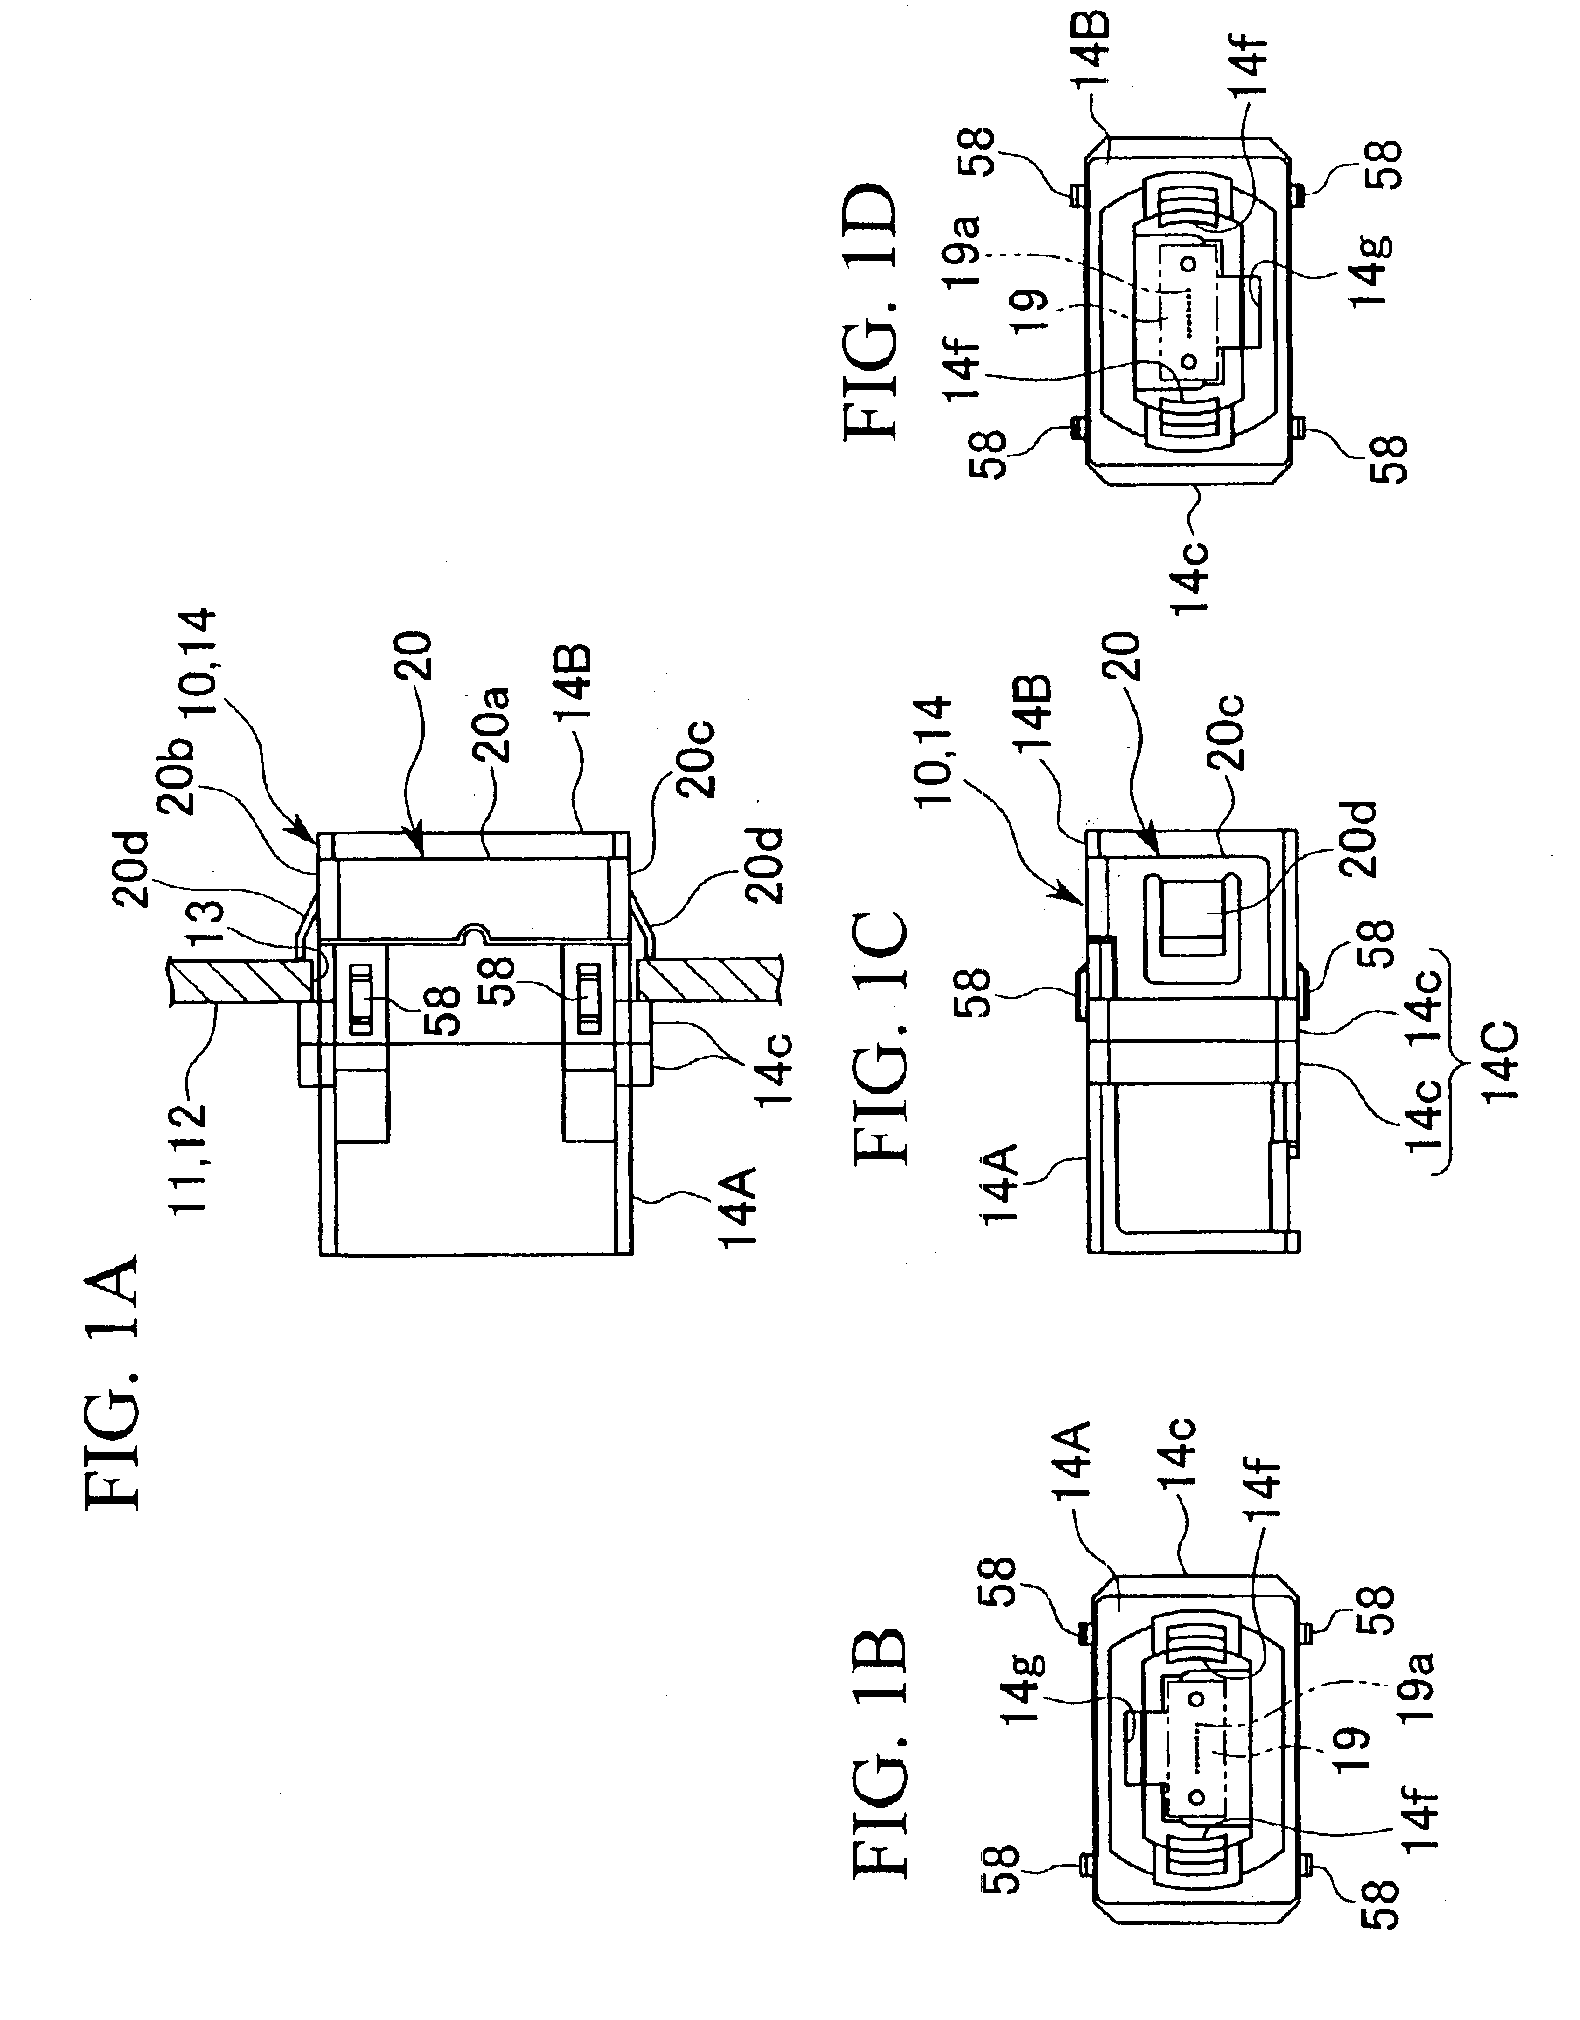 Optical connector with shutter